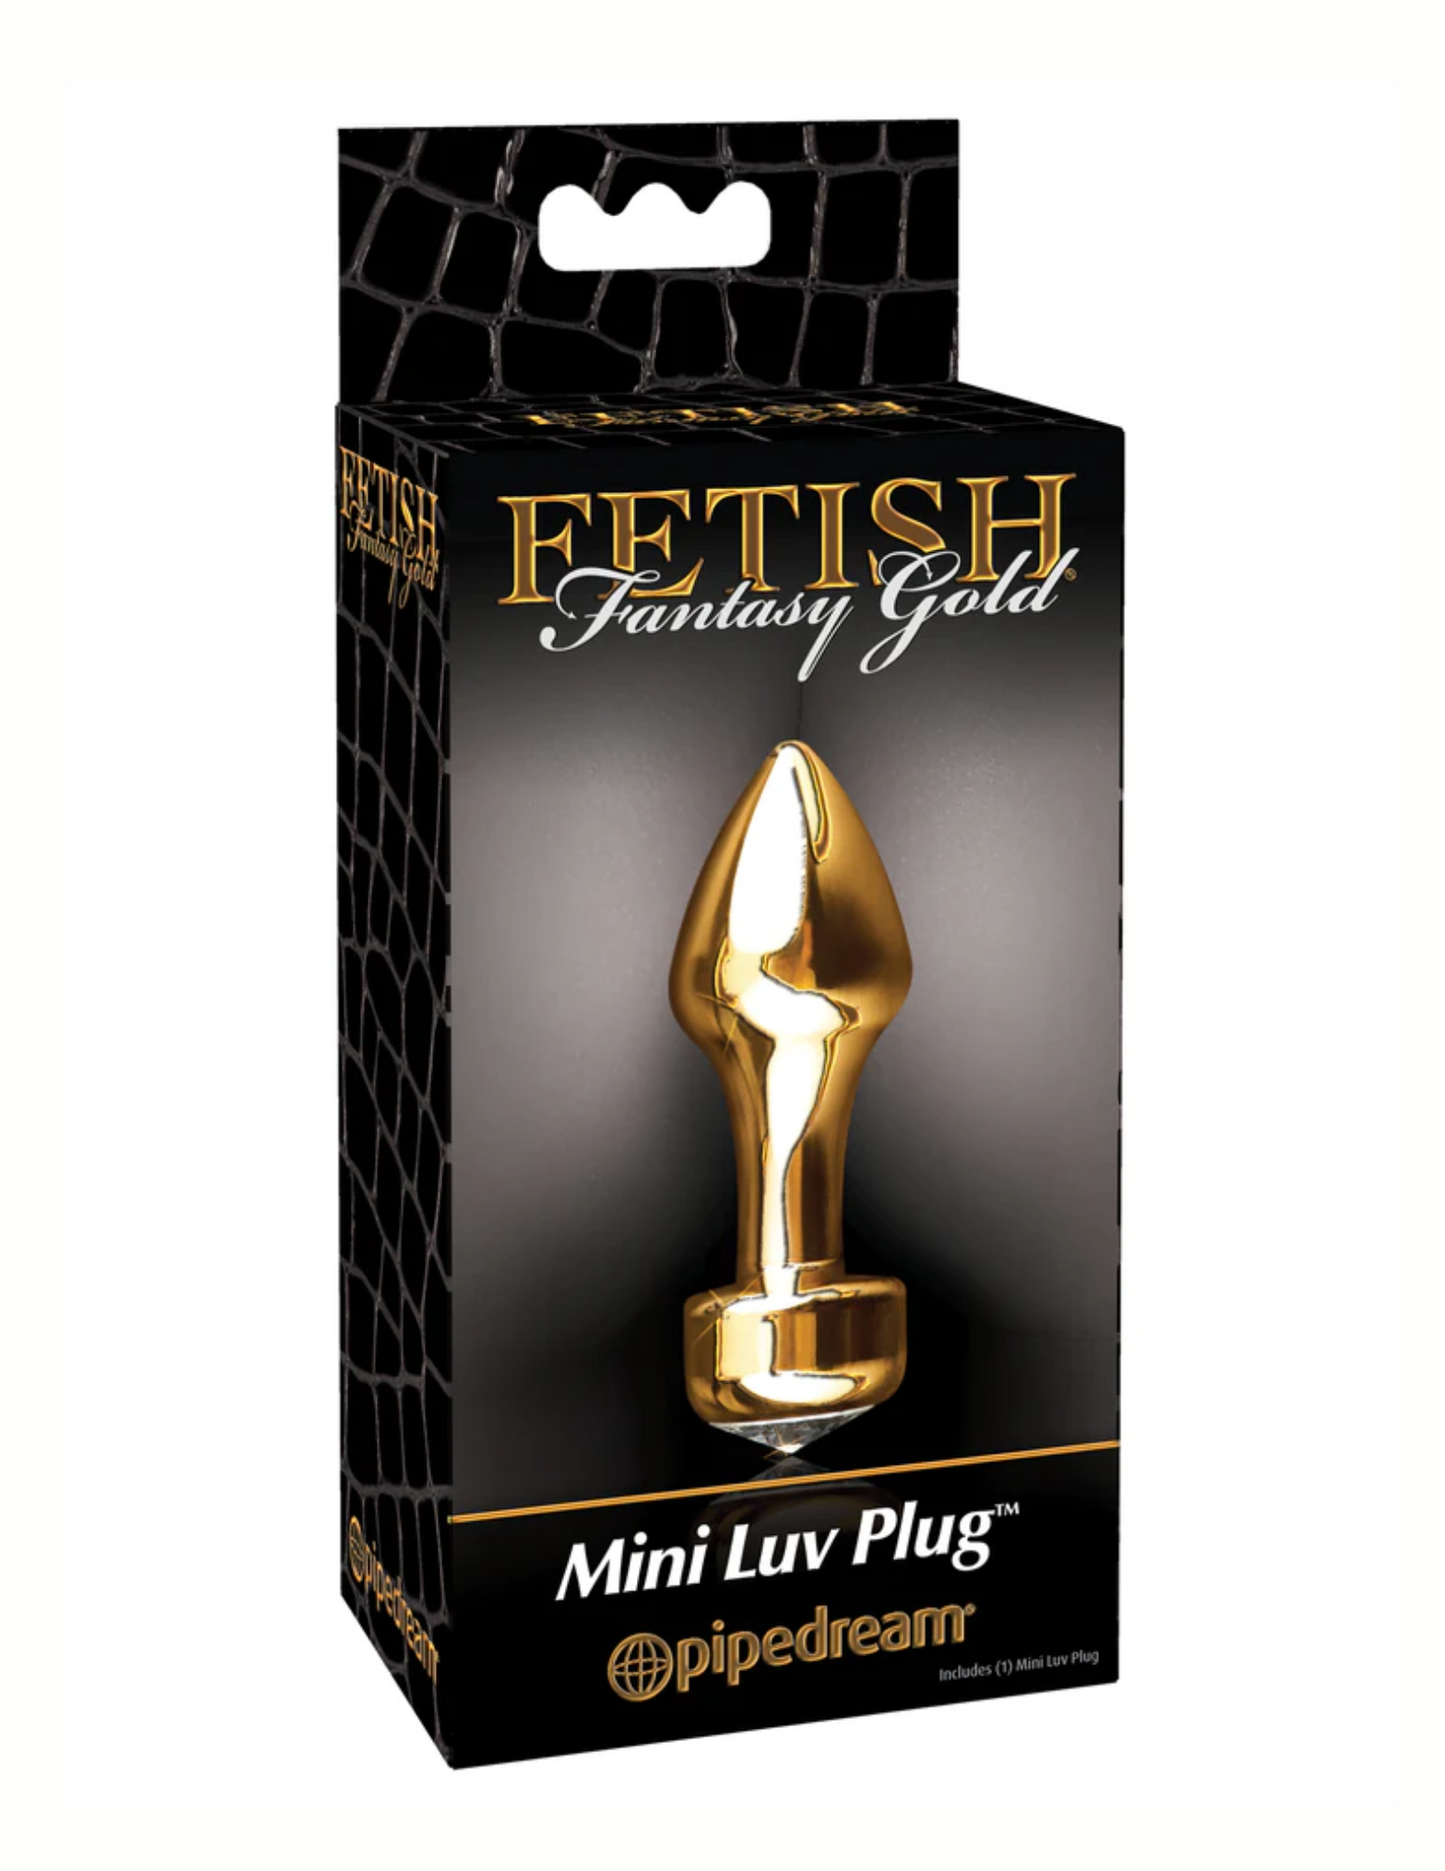 Photo of the front of the box for the Fetish Fantasy Gold Mini Luv Plug from Pipedreams.